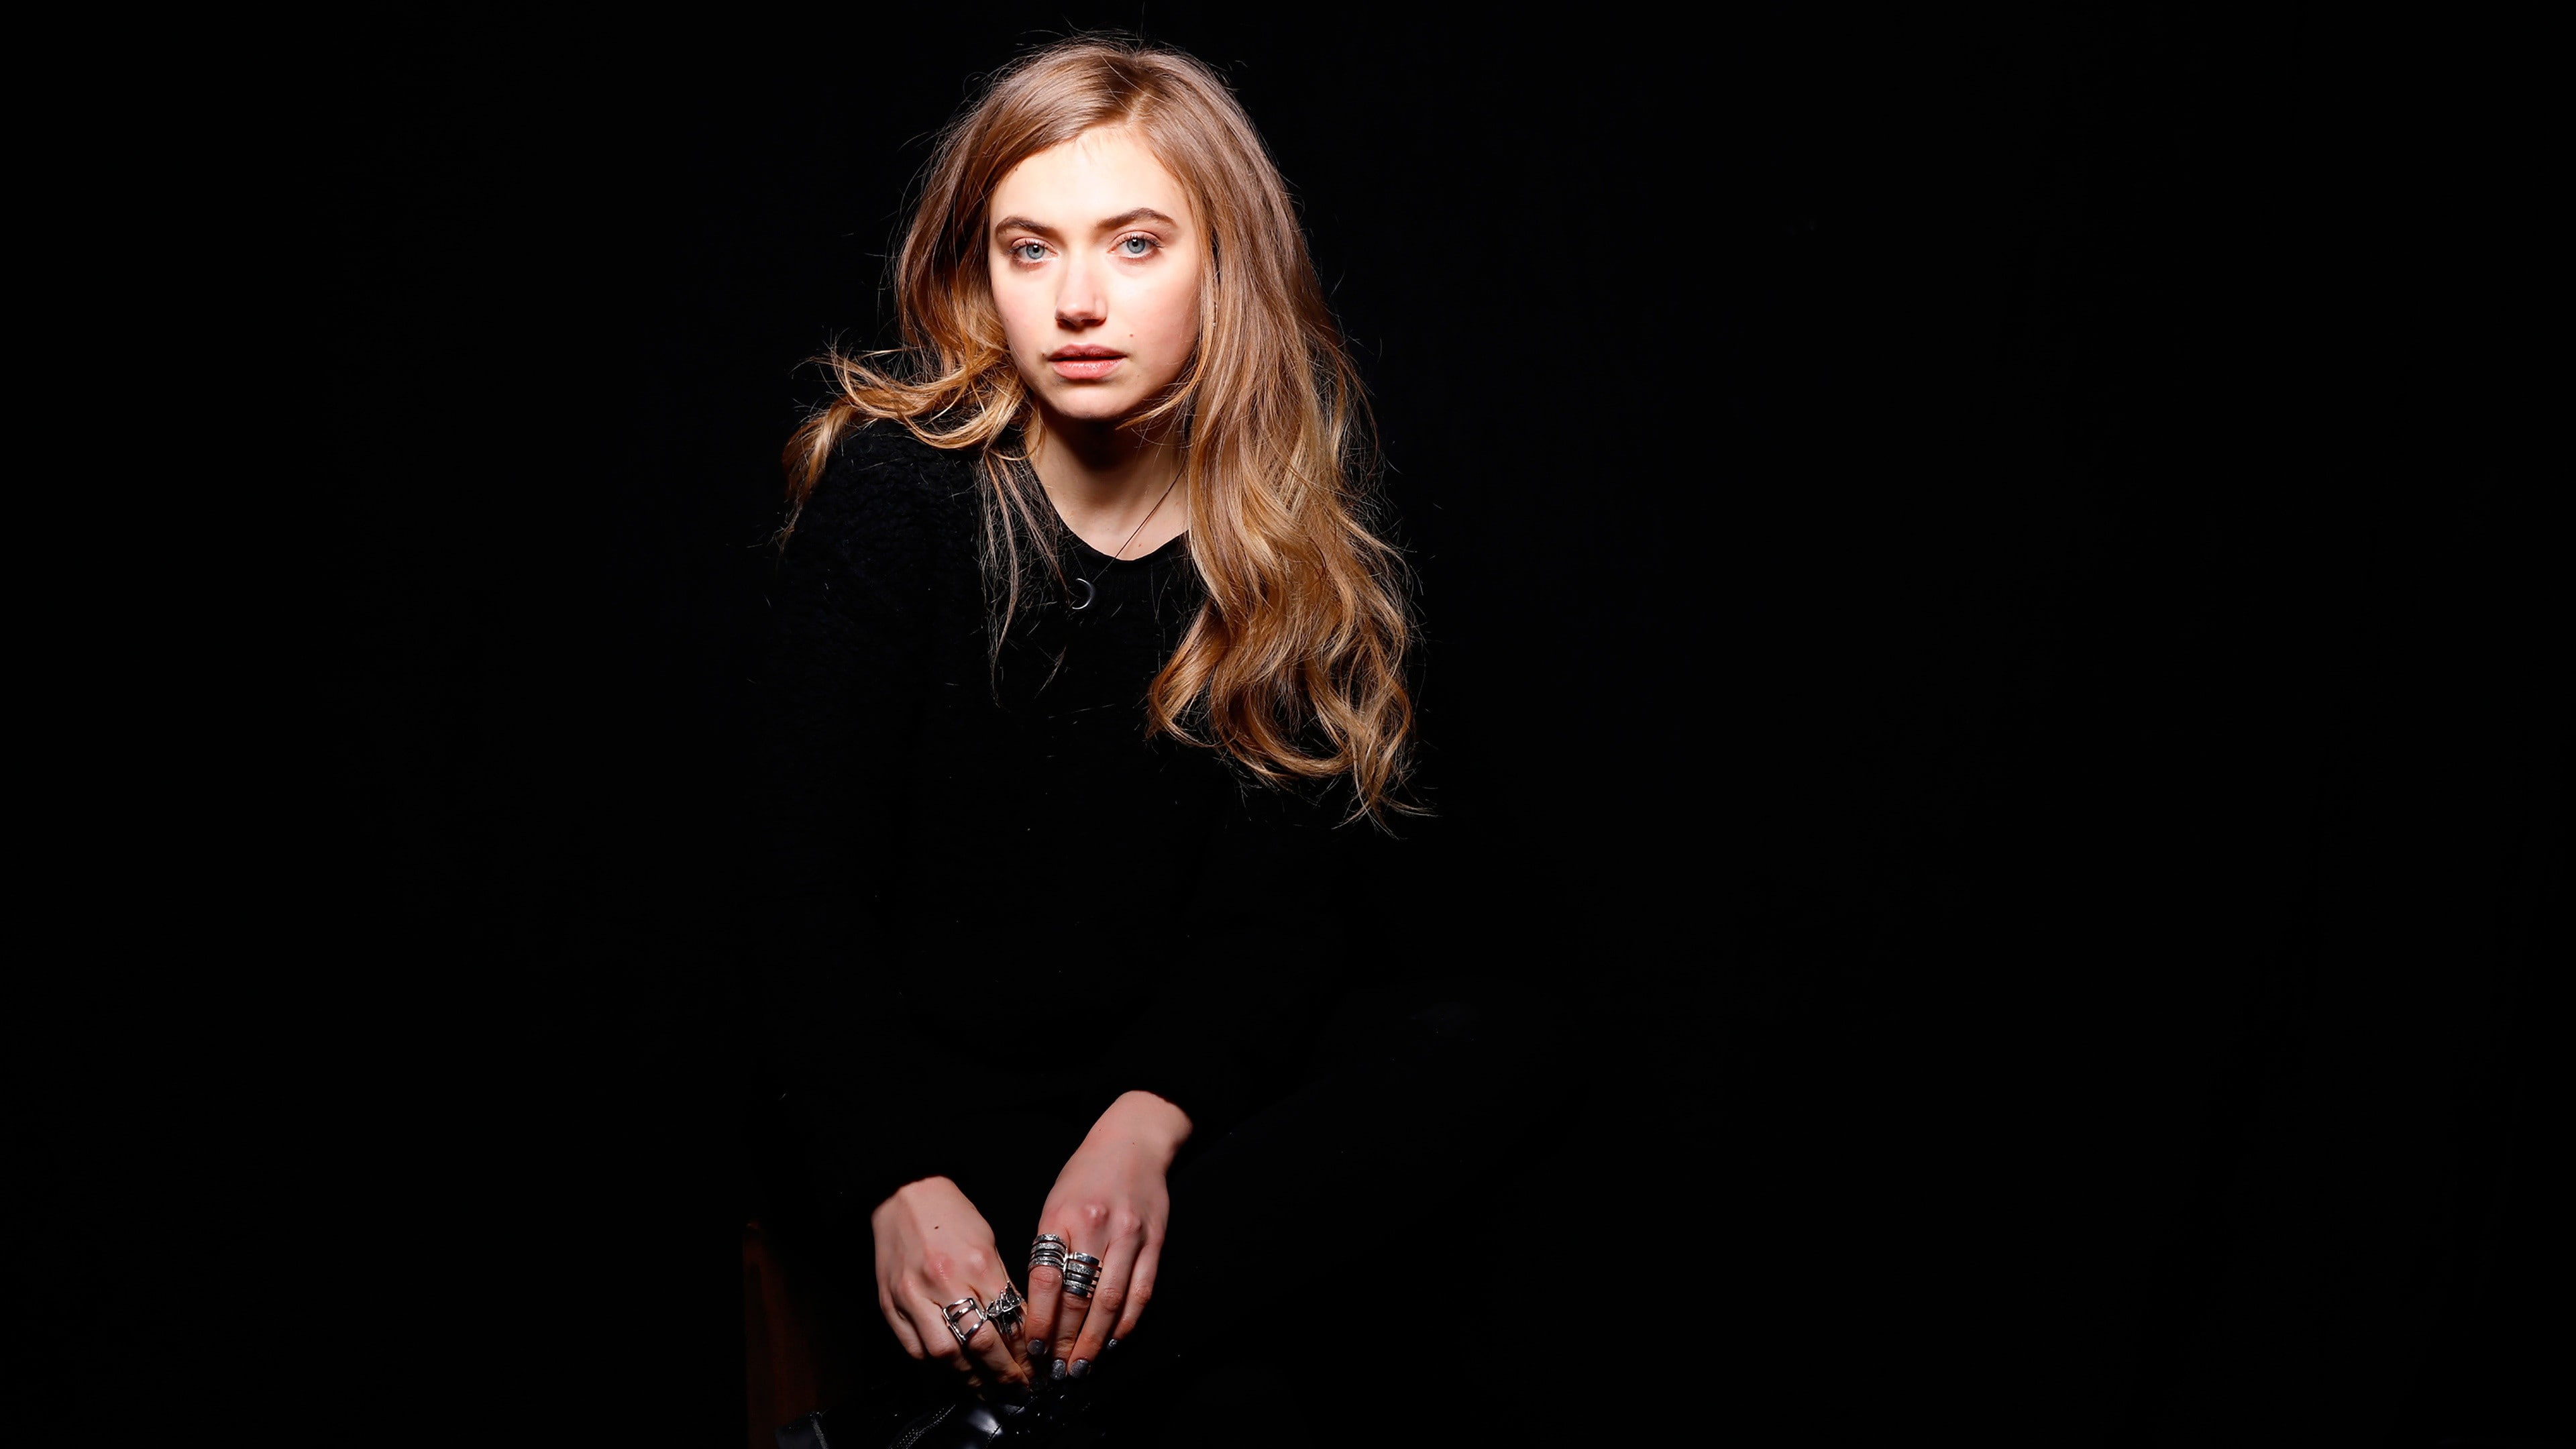 Imogen Poots, actress, celebrity, women, black background, one person